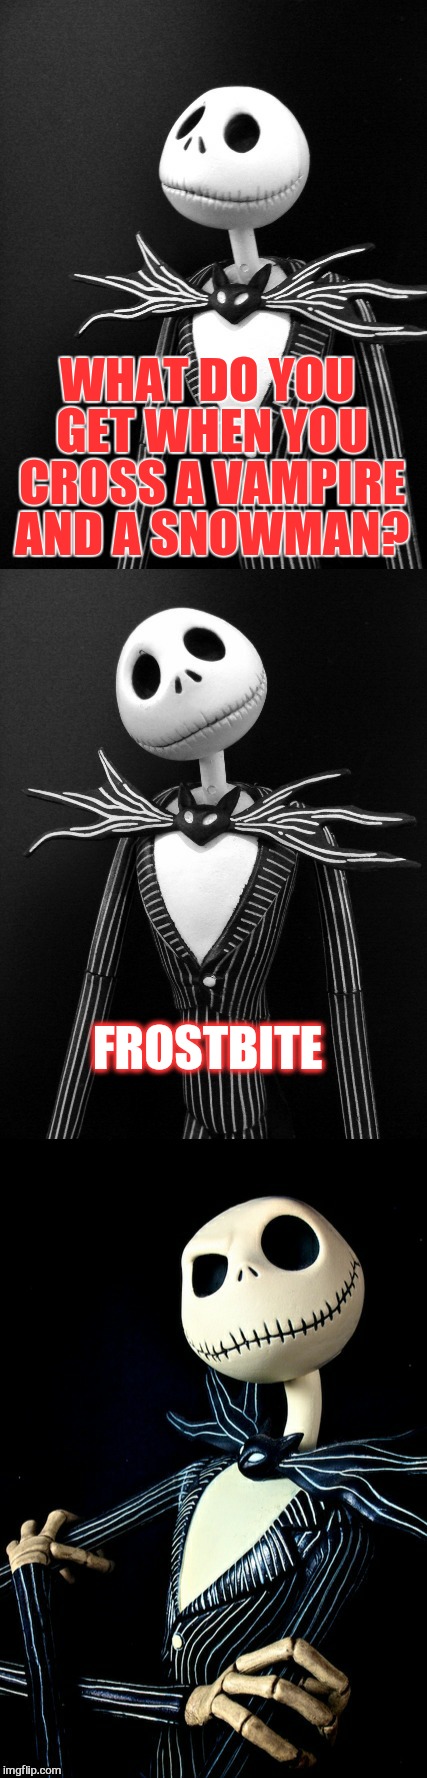 A Mini Dash Halloween Meme  | WHAT DO YOU GET WHEN YOU CROSS A VAMPIRE AND A SNOWMAN? FROSTBITE | image tagged in jack puns,funny meme,jokes,mini dash,vampires,snowman | made w/ Imgflip meme maker